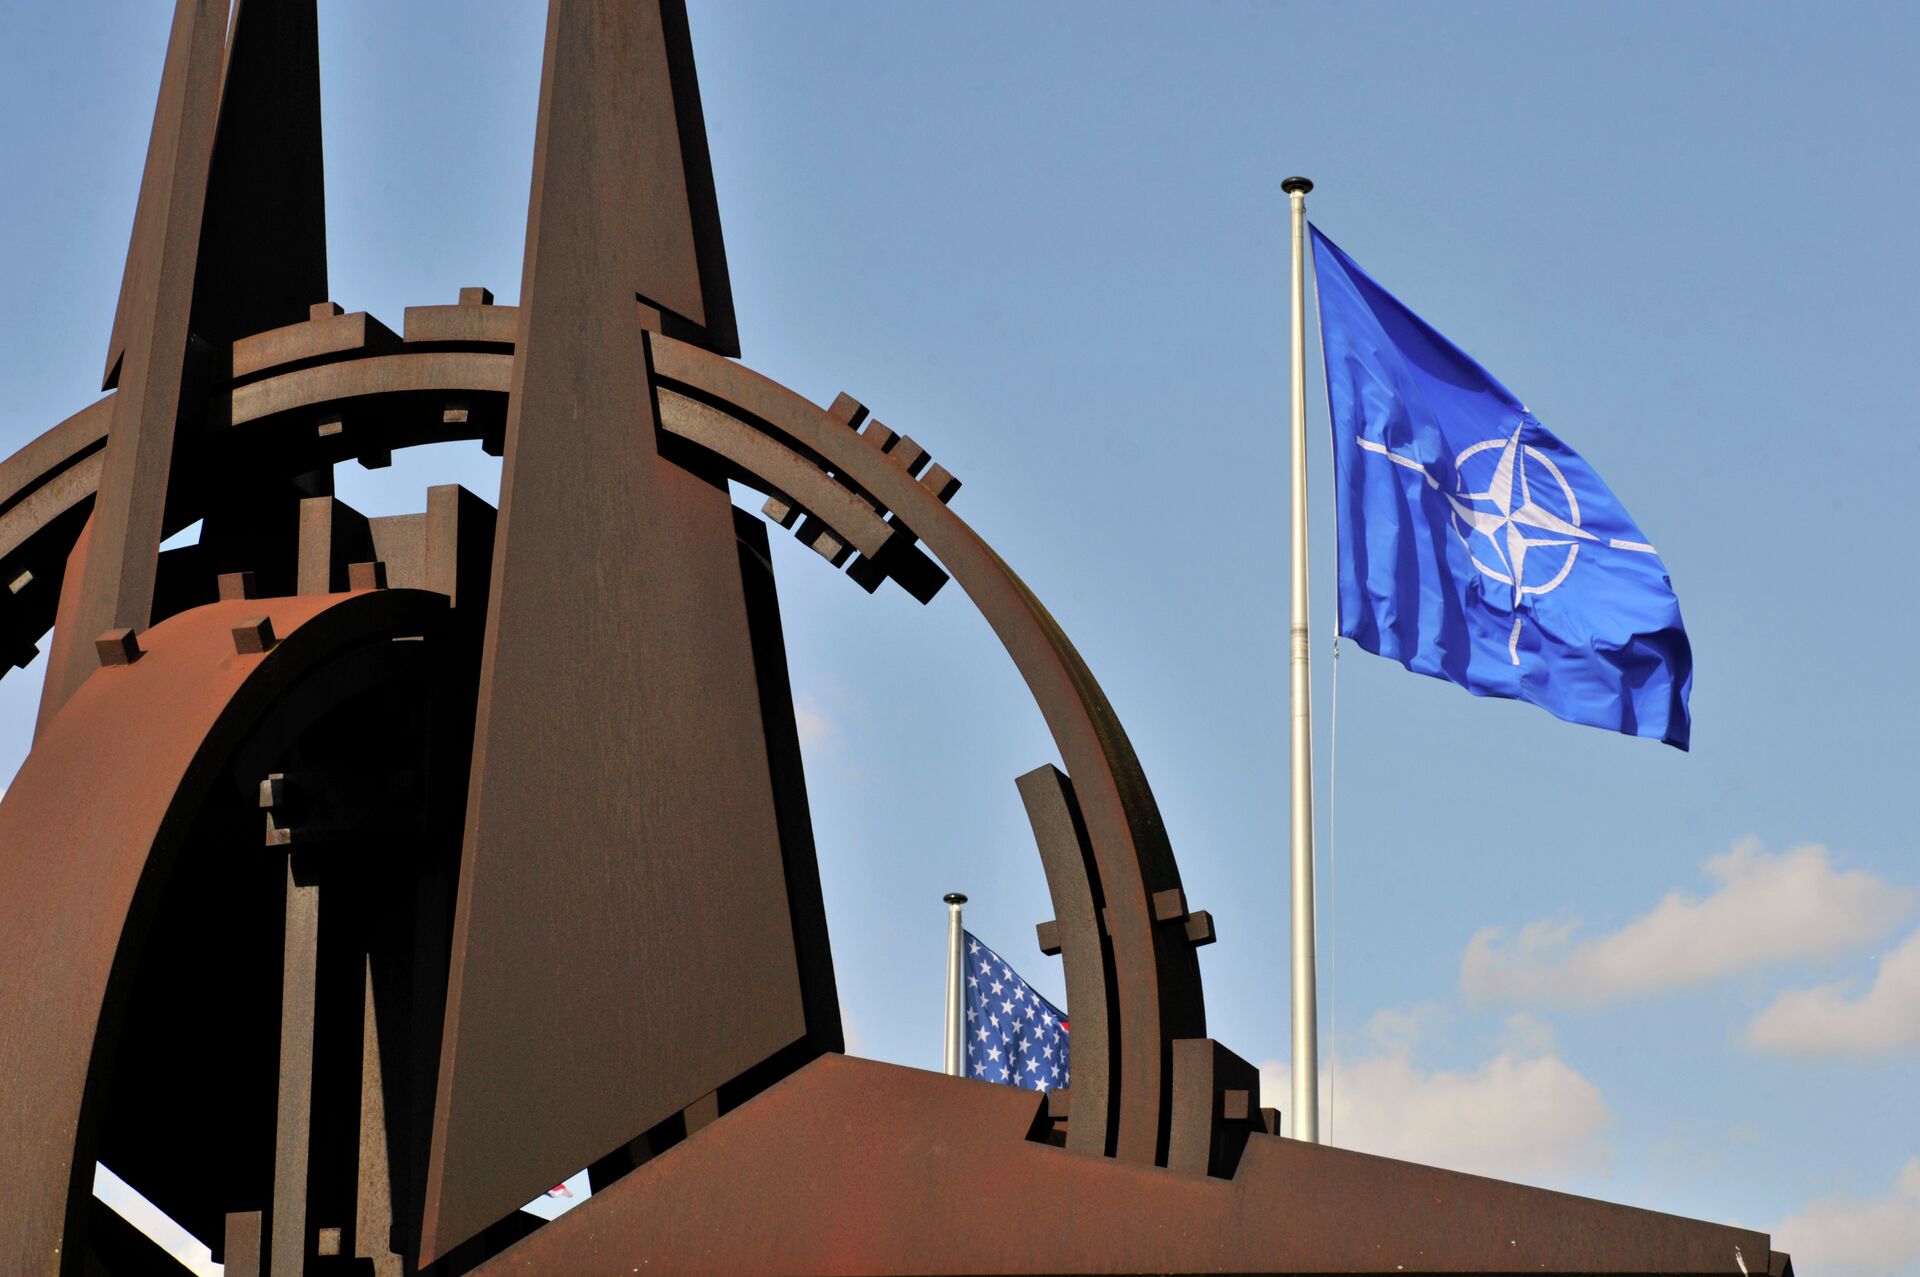 NATO flag in the wind at the NATO headquarters in Brussels. (File) - Sputnik International, 1920, 21.12.2021